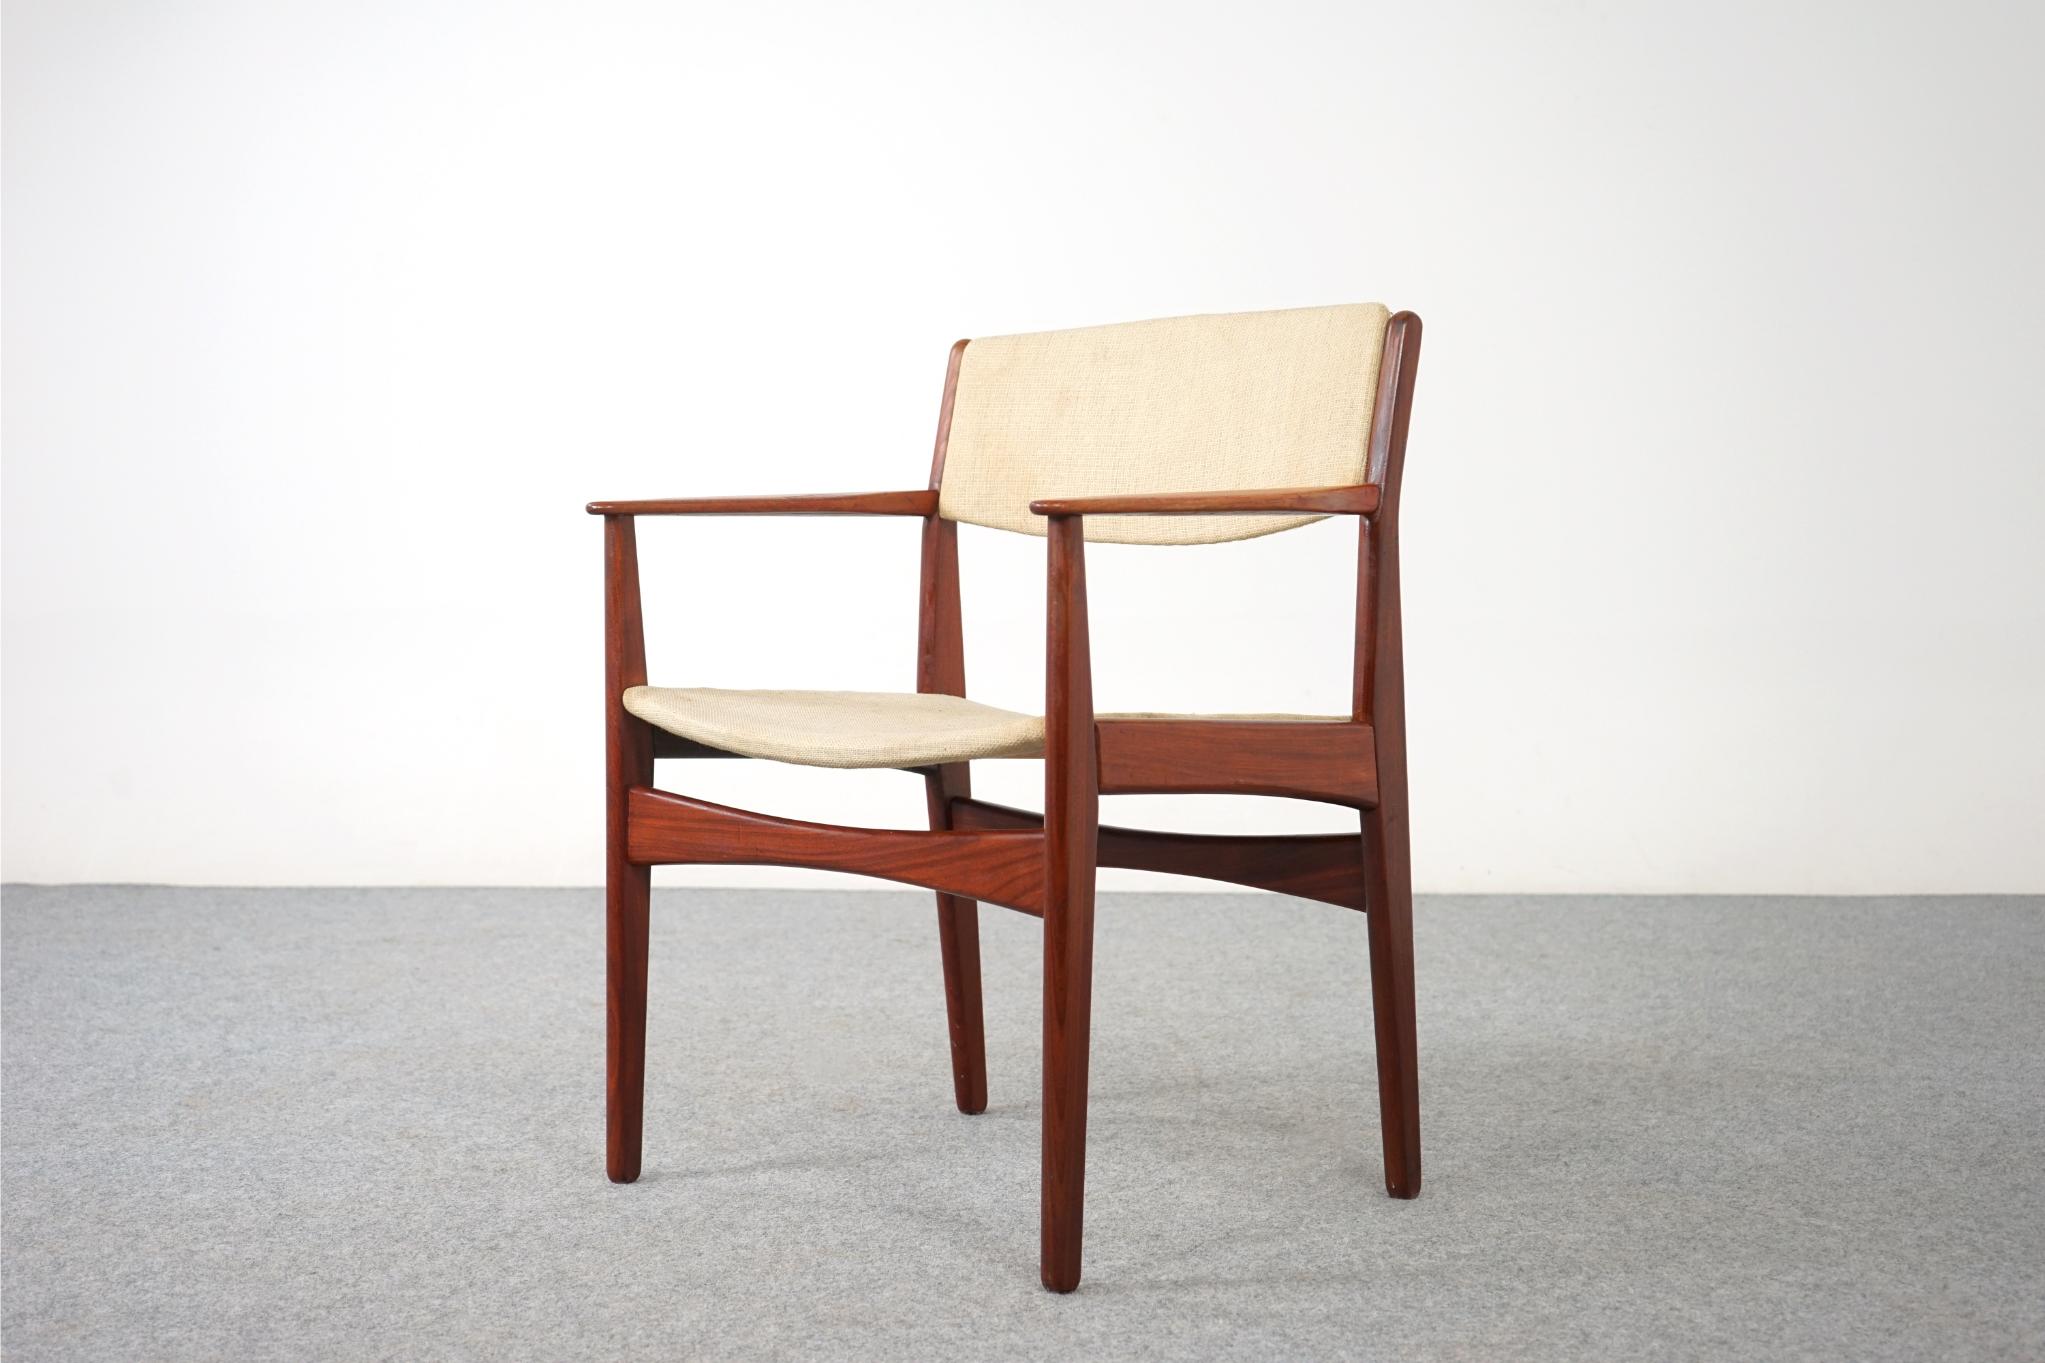 Teak Scandinavian arm chair, circa 1960's. Solid wood frame with upright upholstered back provides support and comfort. Clean modern design makes it easy to combine with other furniture in your home. A versatile chair for all your seating